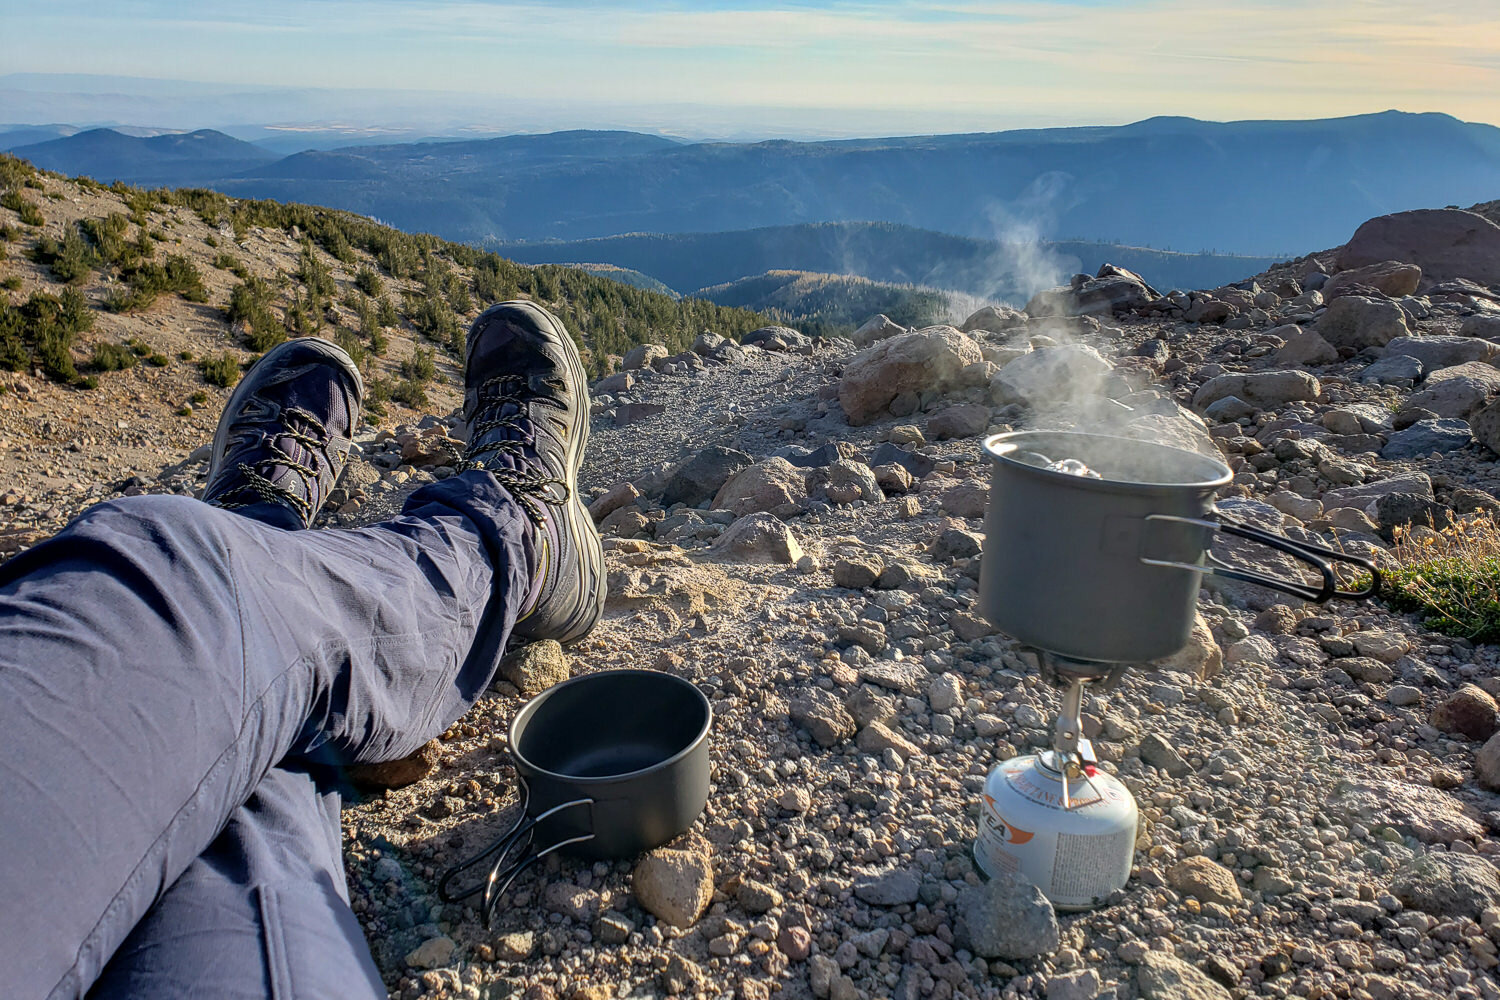 The Soto Amicus Stove Cookset Combo comes with an ultralight stove, a large-capacity pot & a lid that doubles as a cup